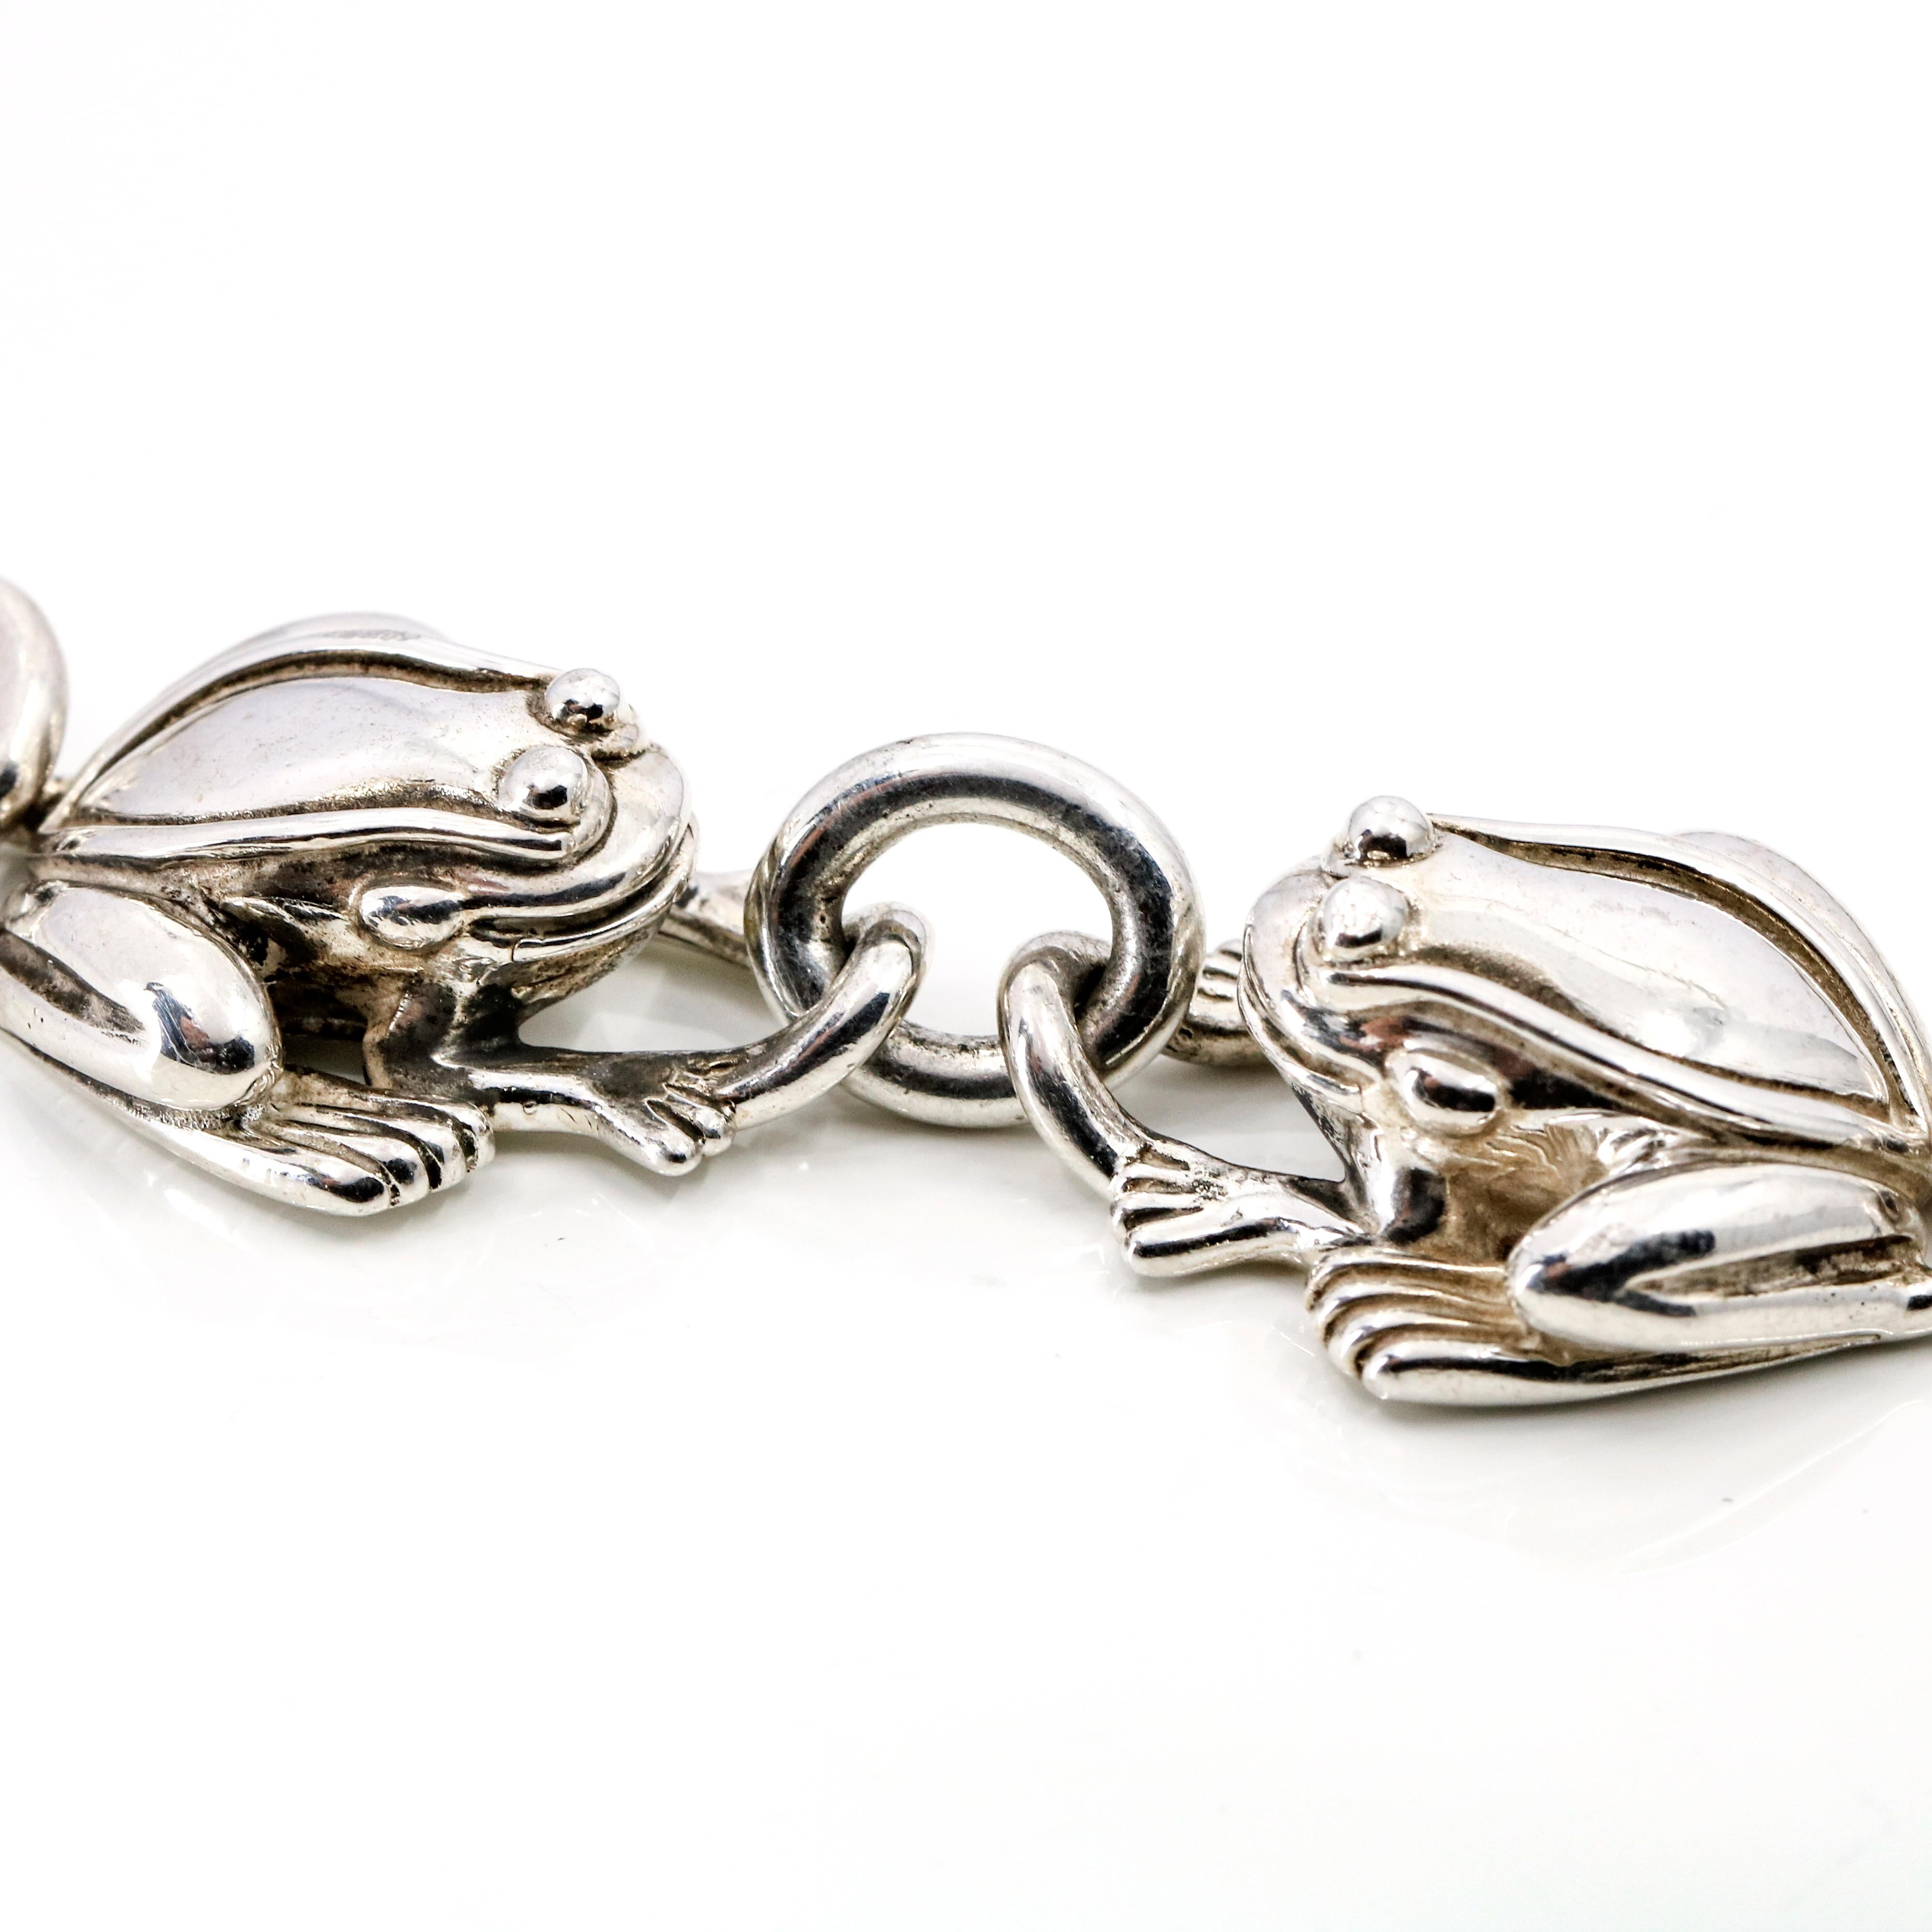 Kieselstein-Cord frog necklace in sterling silver. Circa 1997. All the links are marked with the Kieselstein-Cord signature Sun and Moon symbol. 

Frogs, 31.5mm x 21.5mm x 10mm
Length, 17 inches
Width, 9.5mm
Depth, 2.5mm
Weight, 110.8 grams